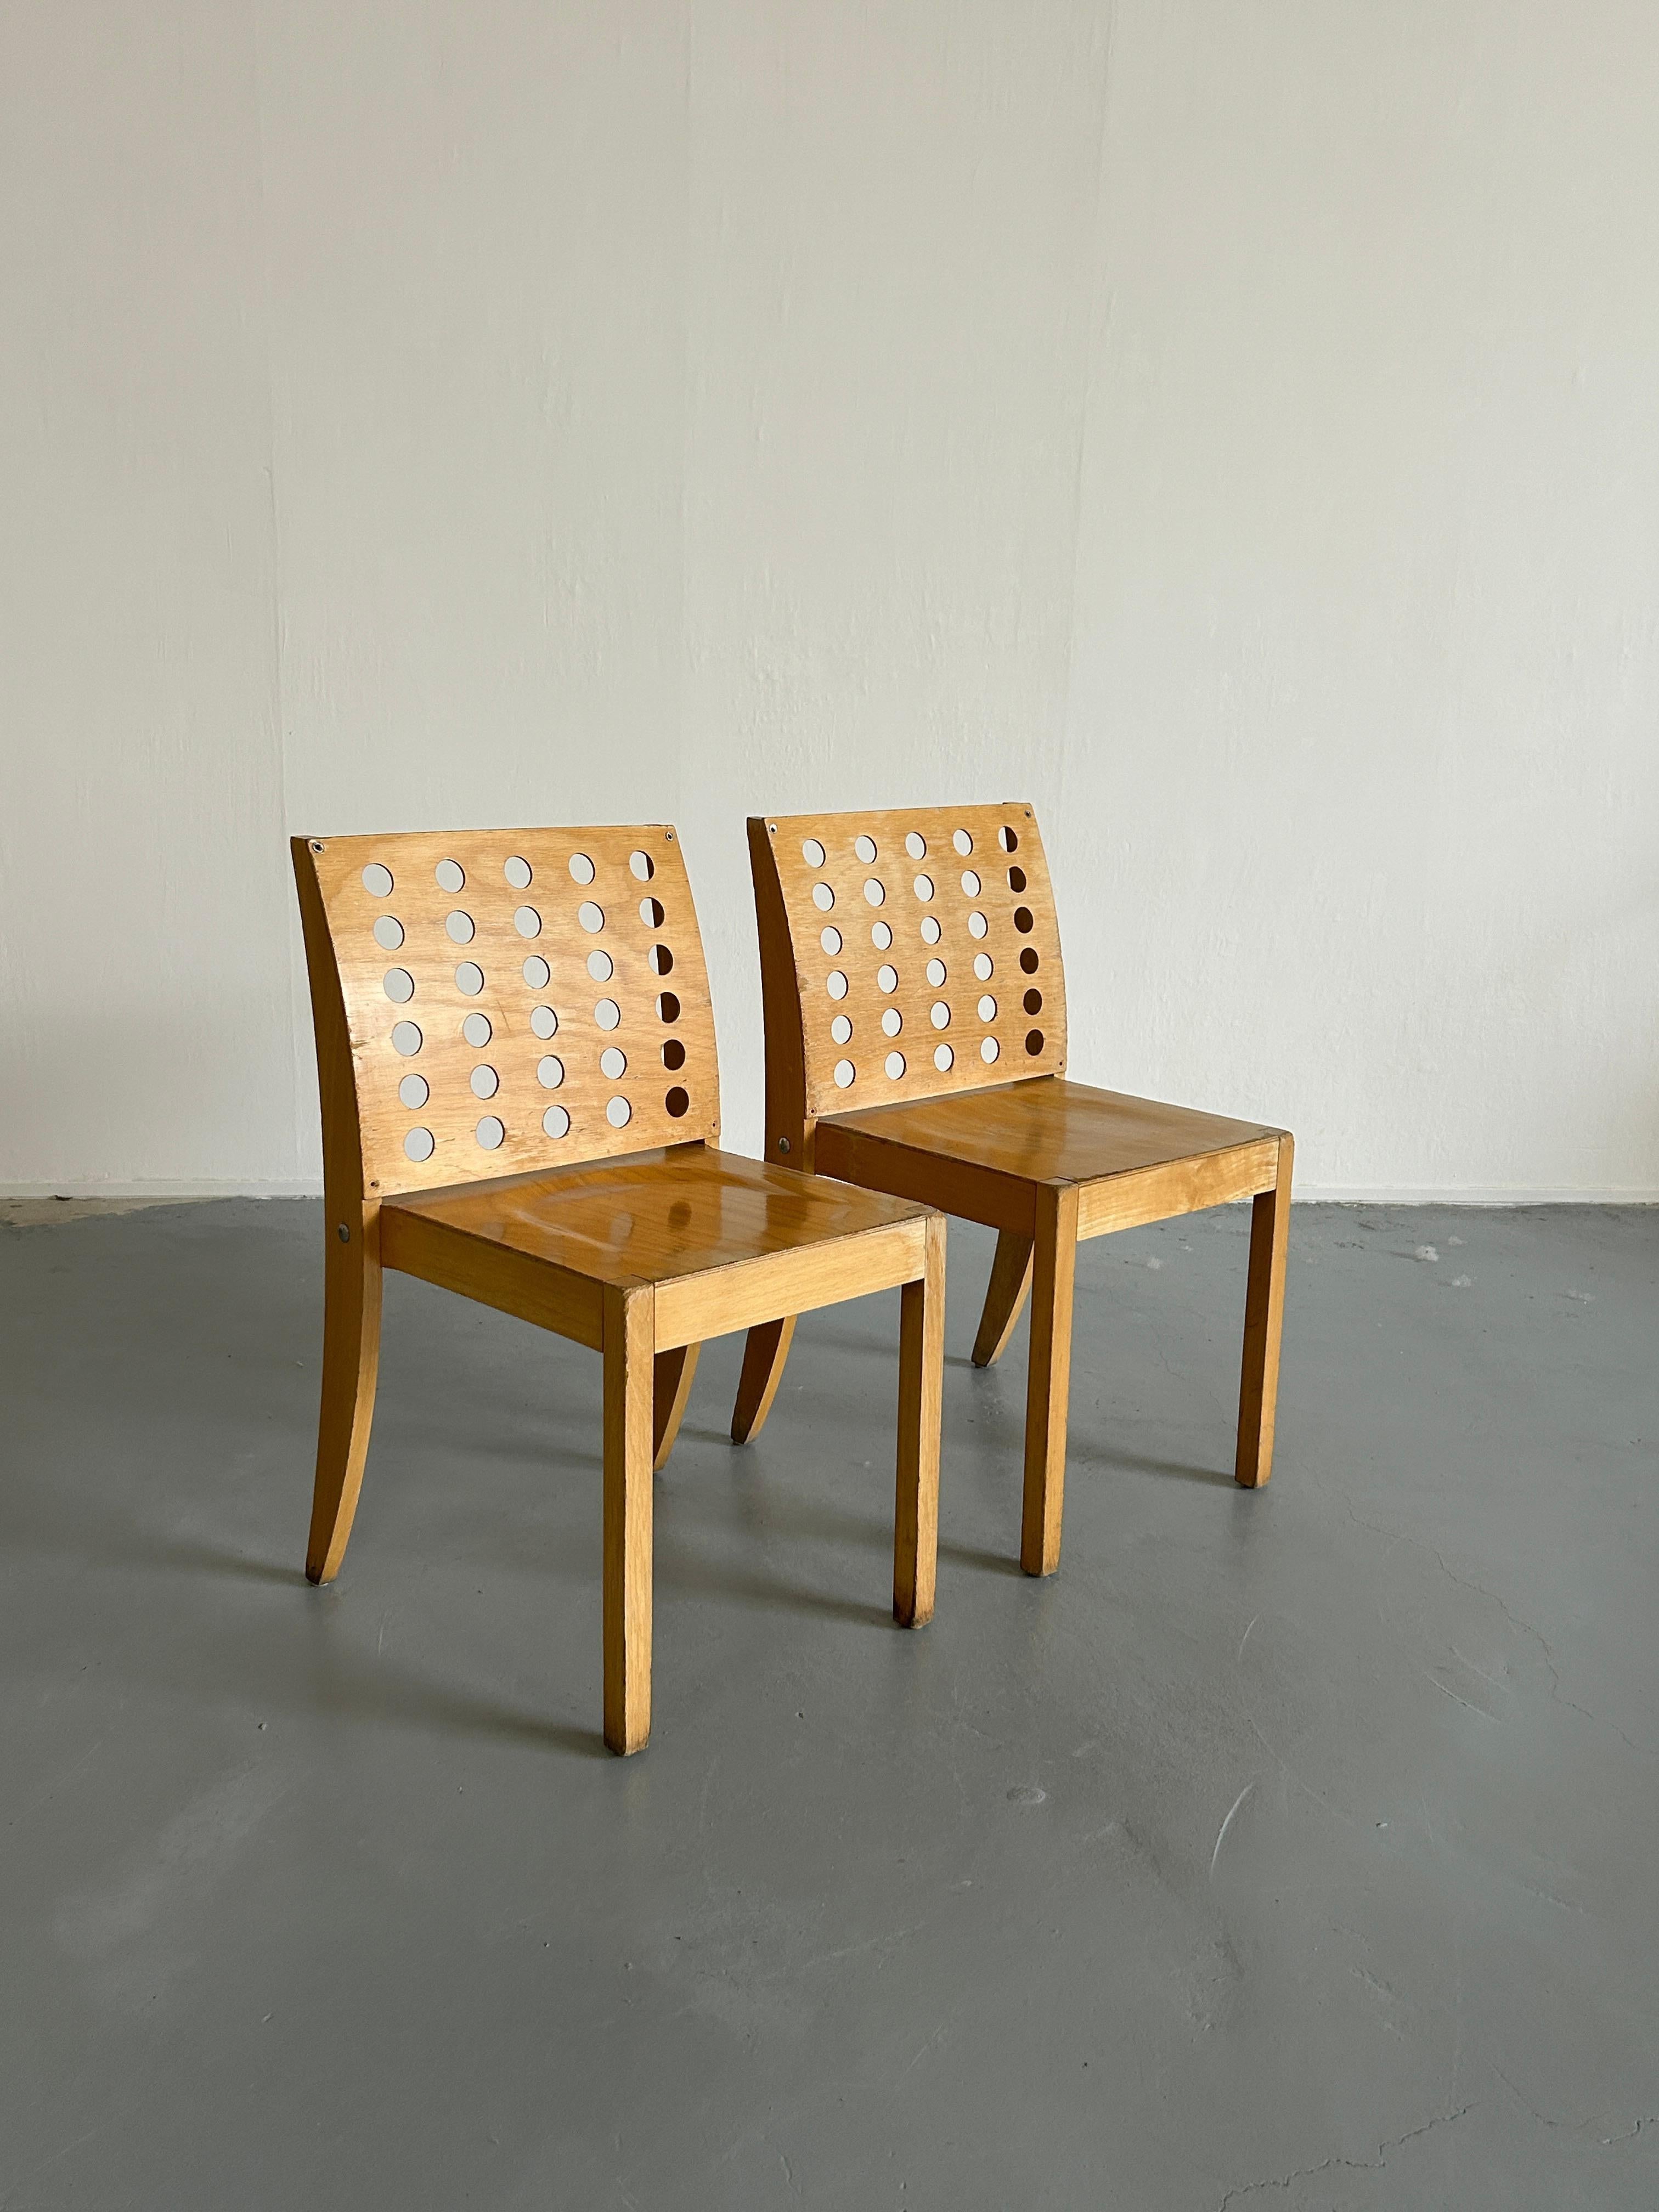 A set of two beautiful vintage and original Thonet S471 chairs, designed by Christoph Zschocke and produced during the 1990s in Germany.
Similar to the style of Roland Rainer.

Lightweight, practical and versatile.

Overall, the chairs are in